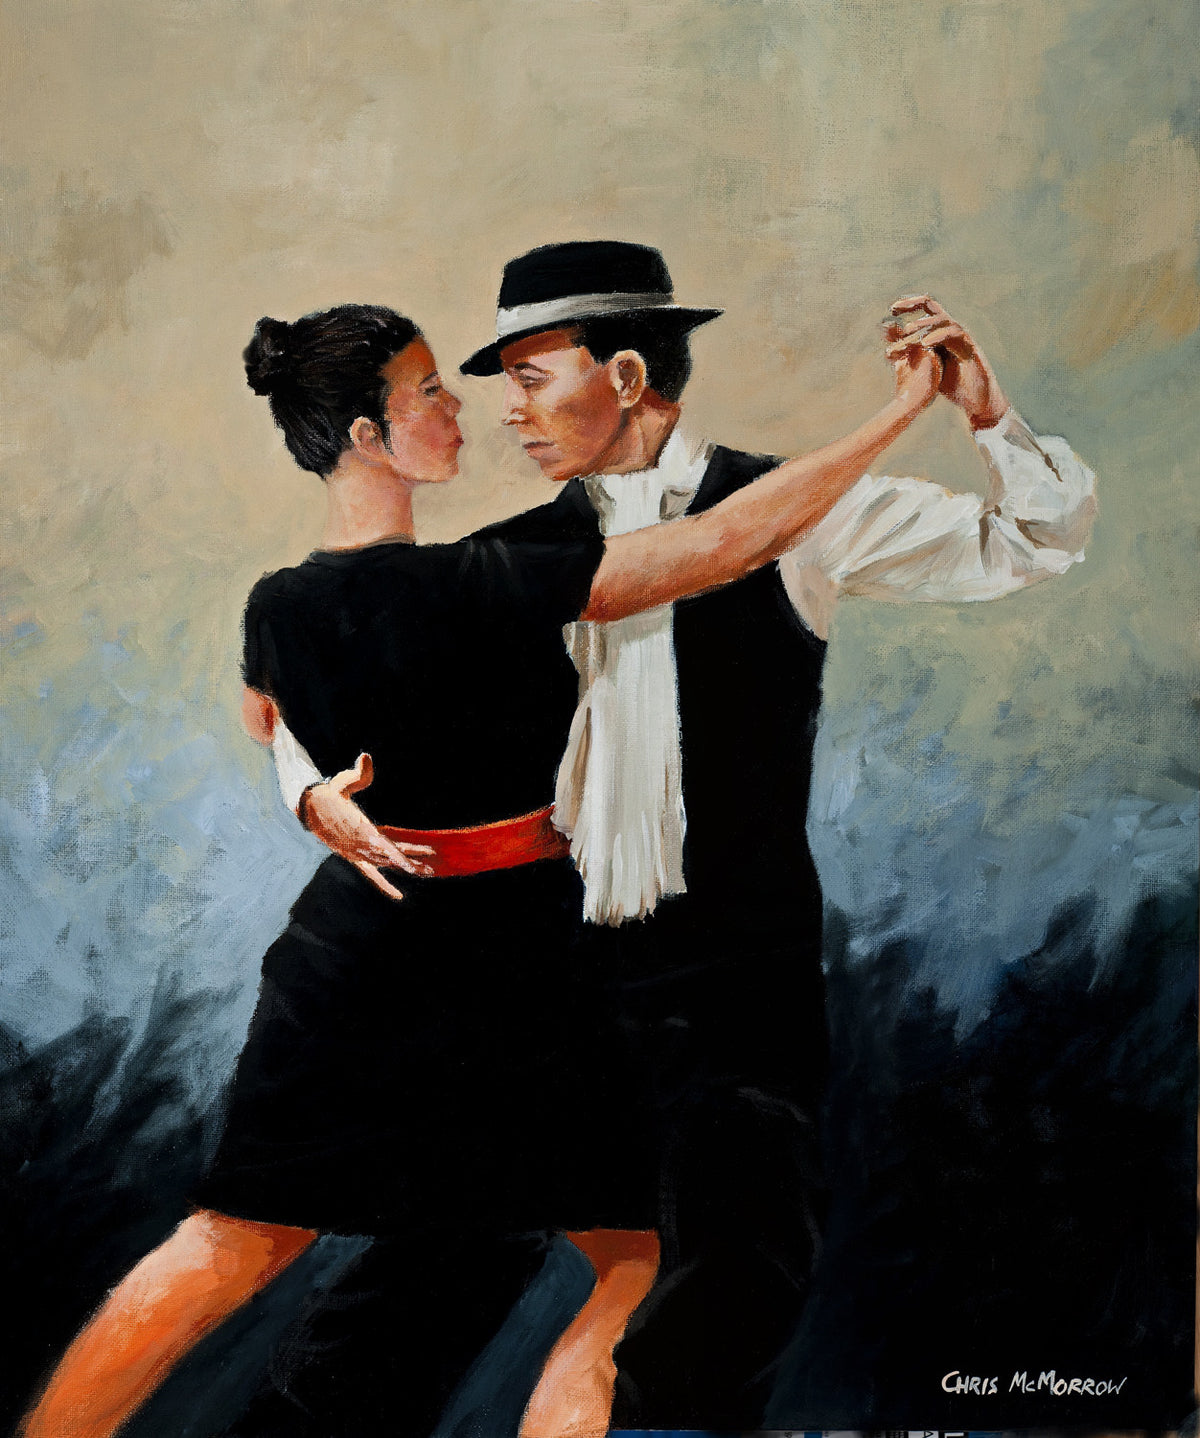 A painting of two dancers dancing the Tango